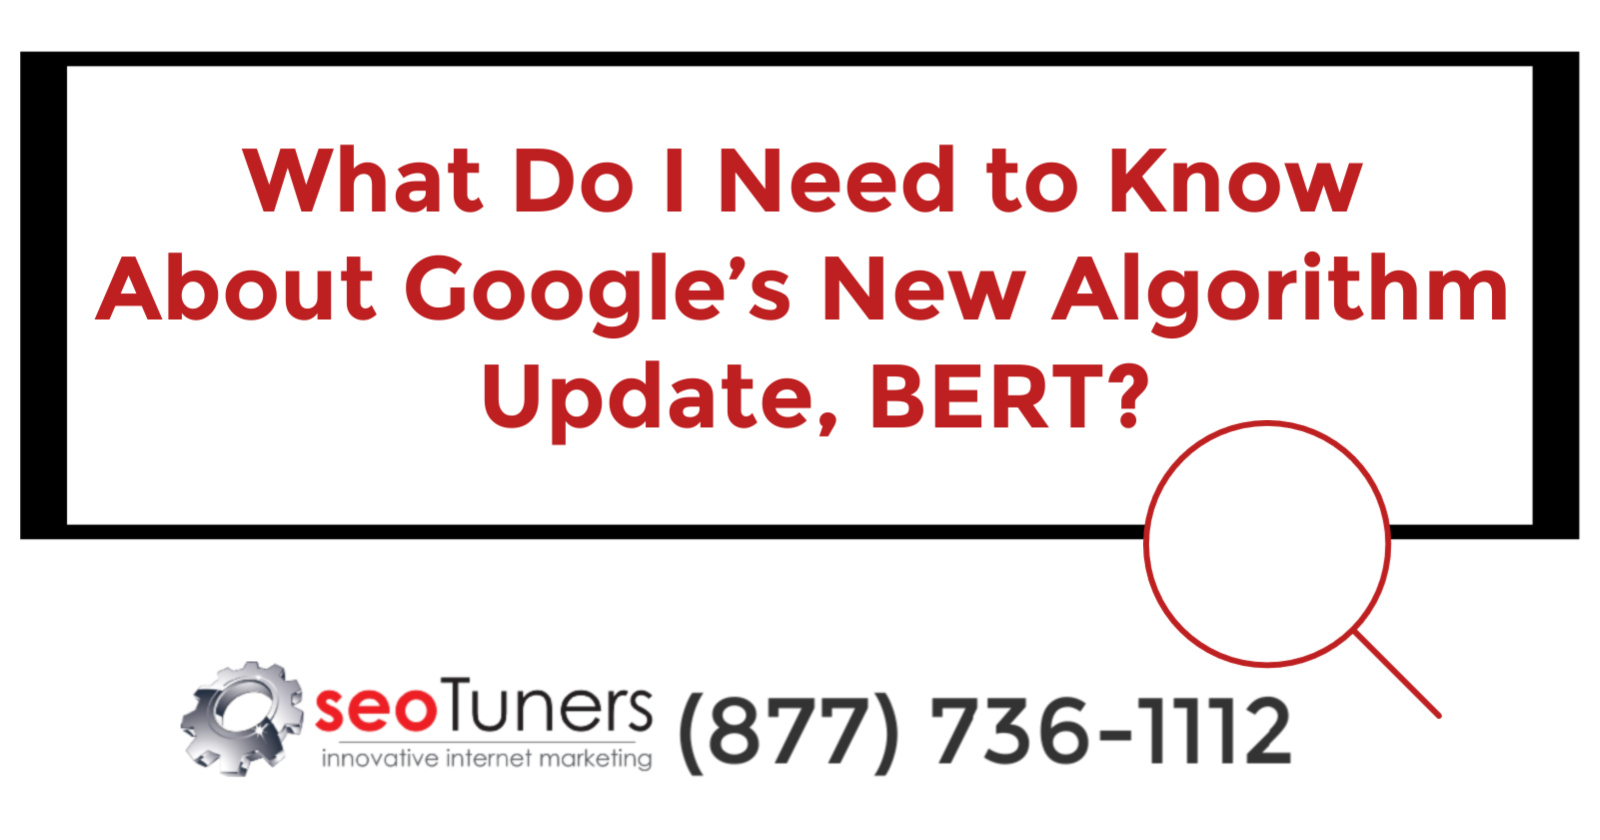 What Do I Need to Know About Google’s New Algorithm Update, BERT?